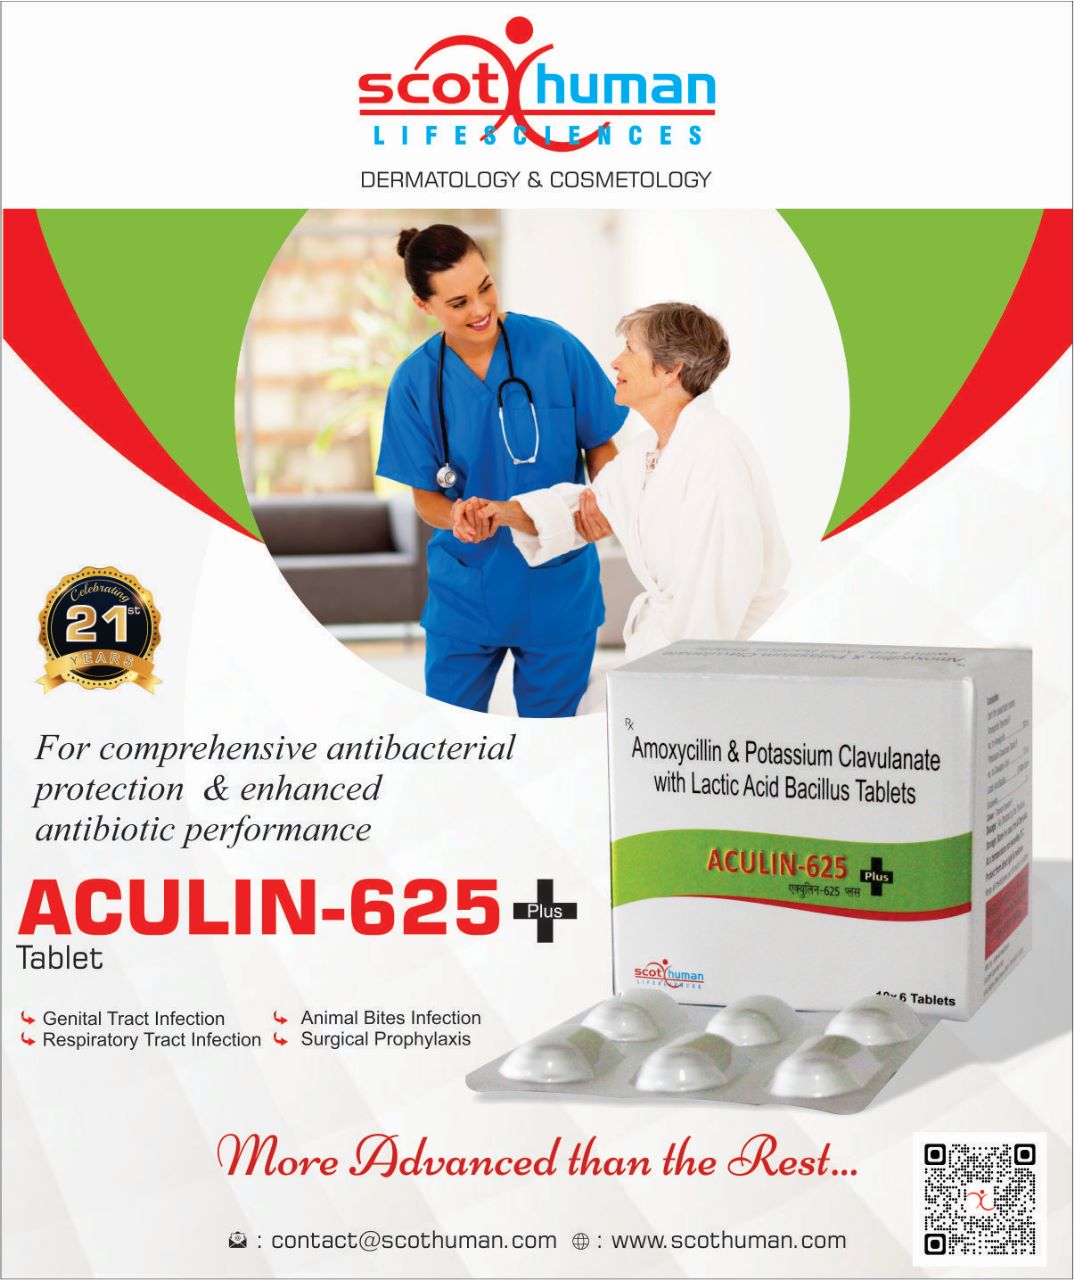 Product Name: Aculin 625+, Compositions of Aculin 625+ are Amoxycillin and Potassium Clavulanate with Lactic Bacillus Tablets - Pharma Drugs and Chemicals